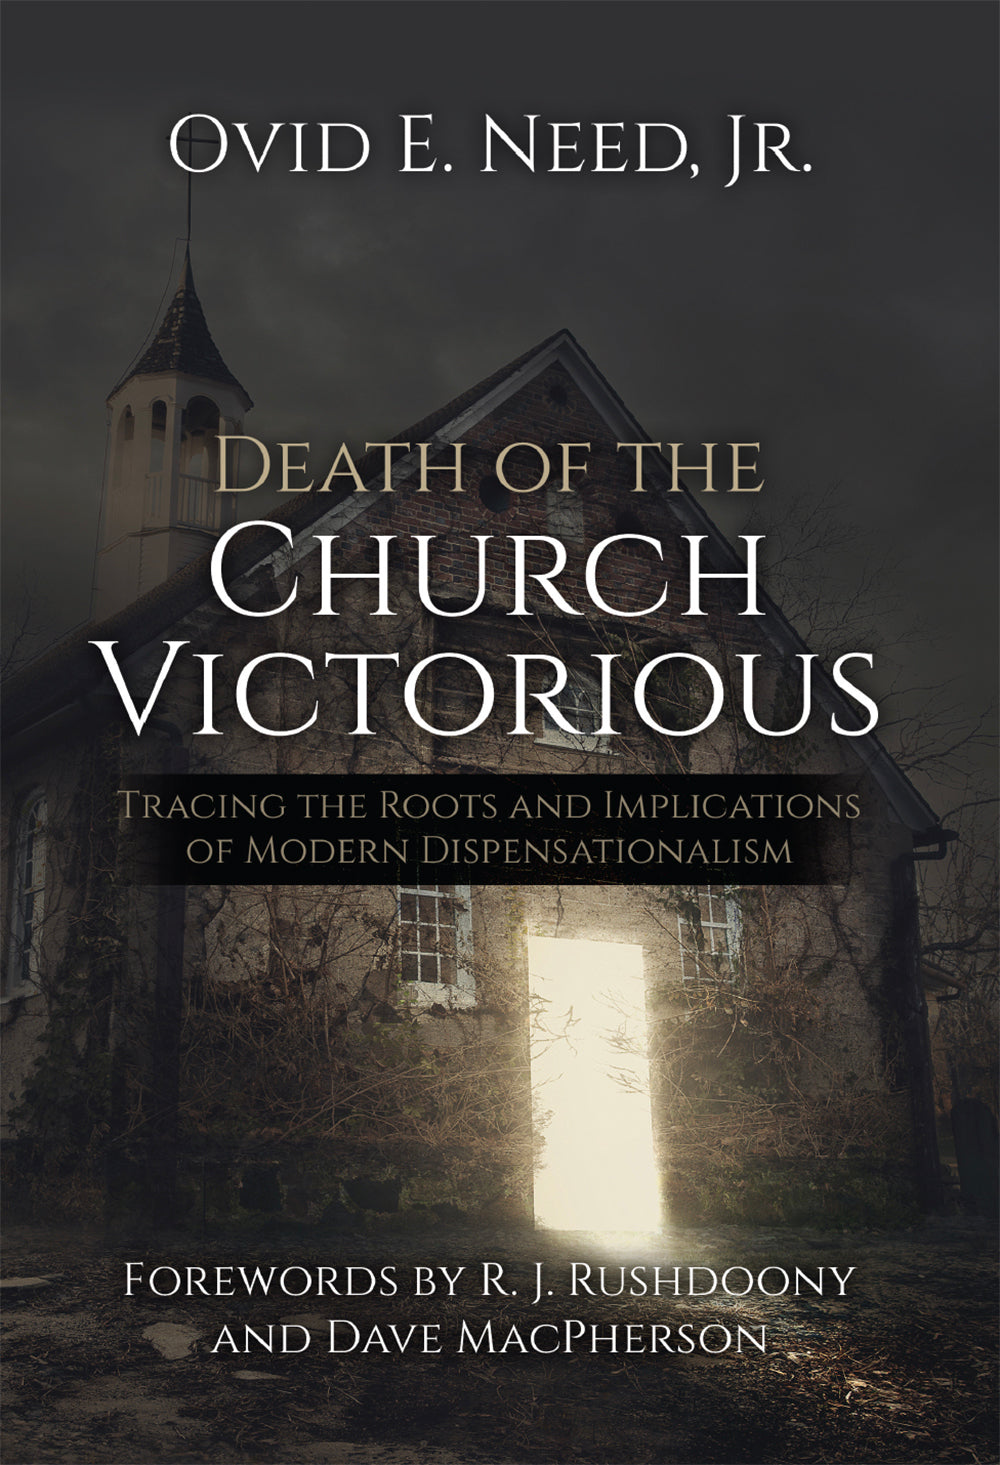 Death of the Church Victorious by Ovid Need is now available!